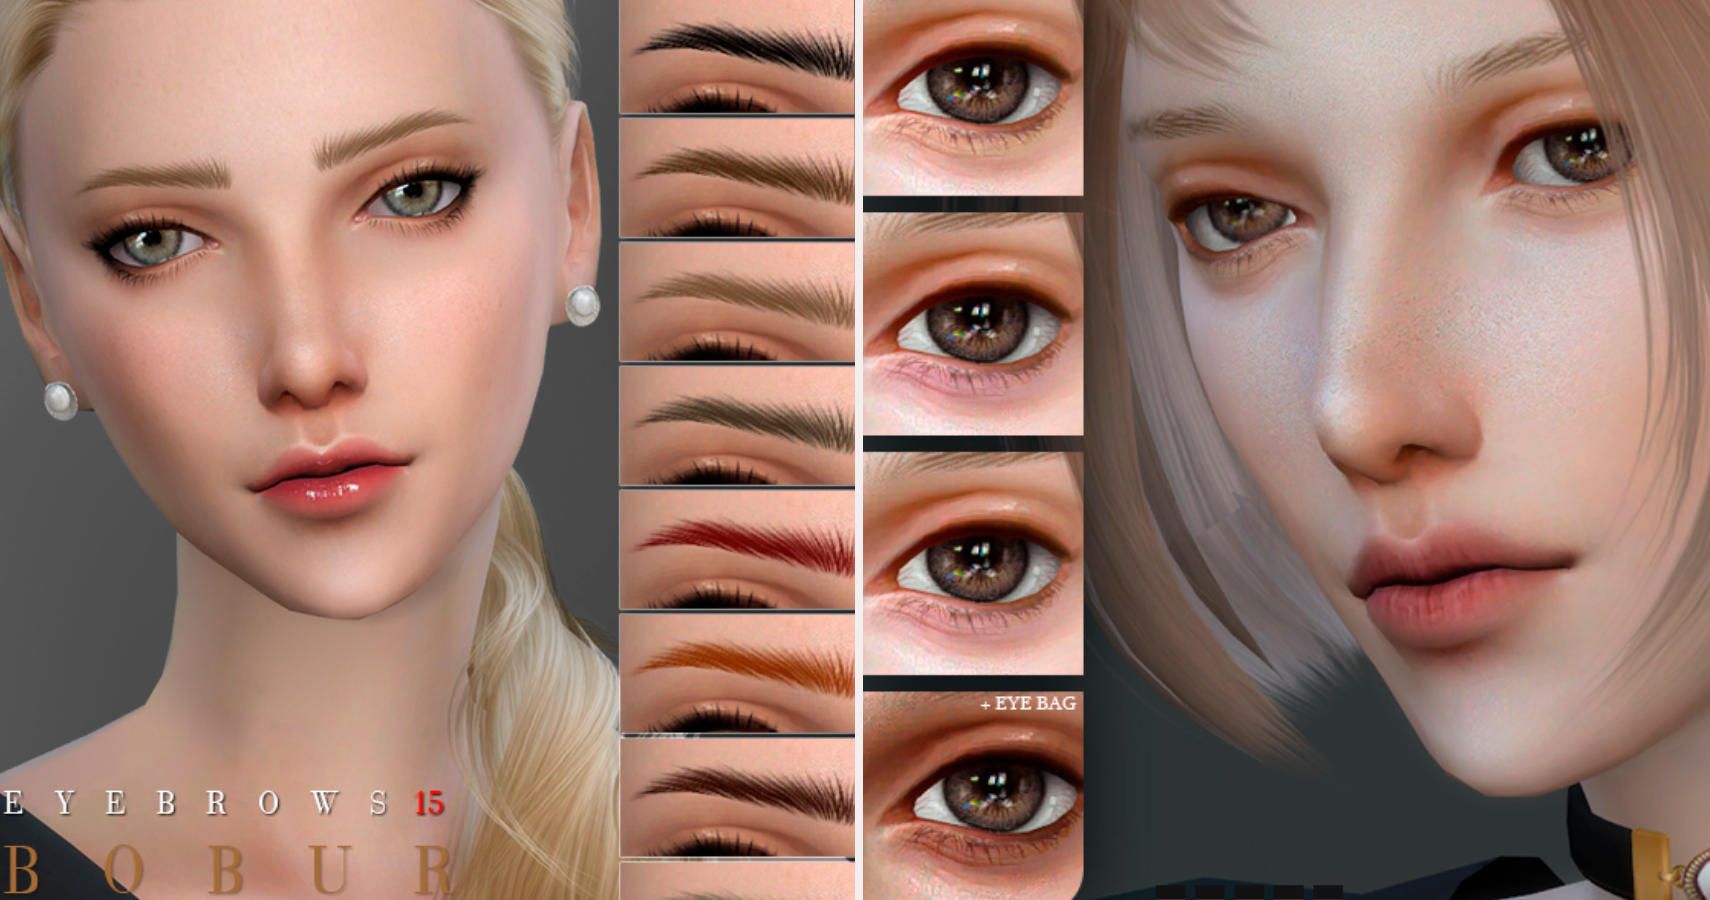 split image, left side sims face and eyebrow swatches right side sims face and eyelash options